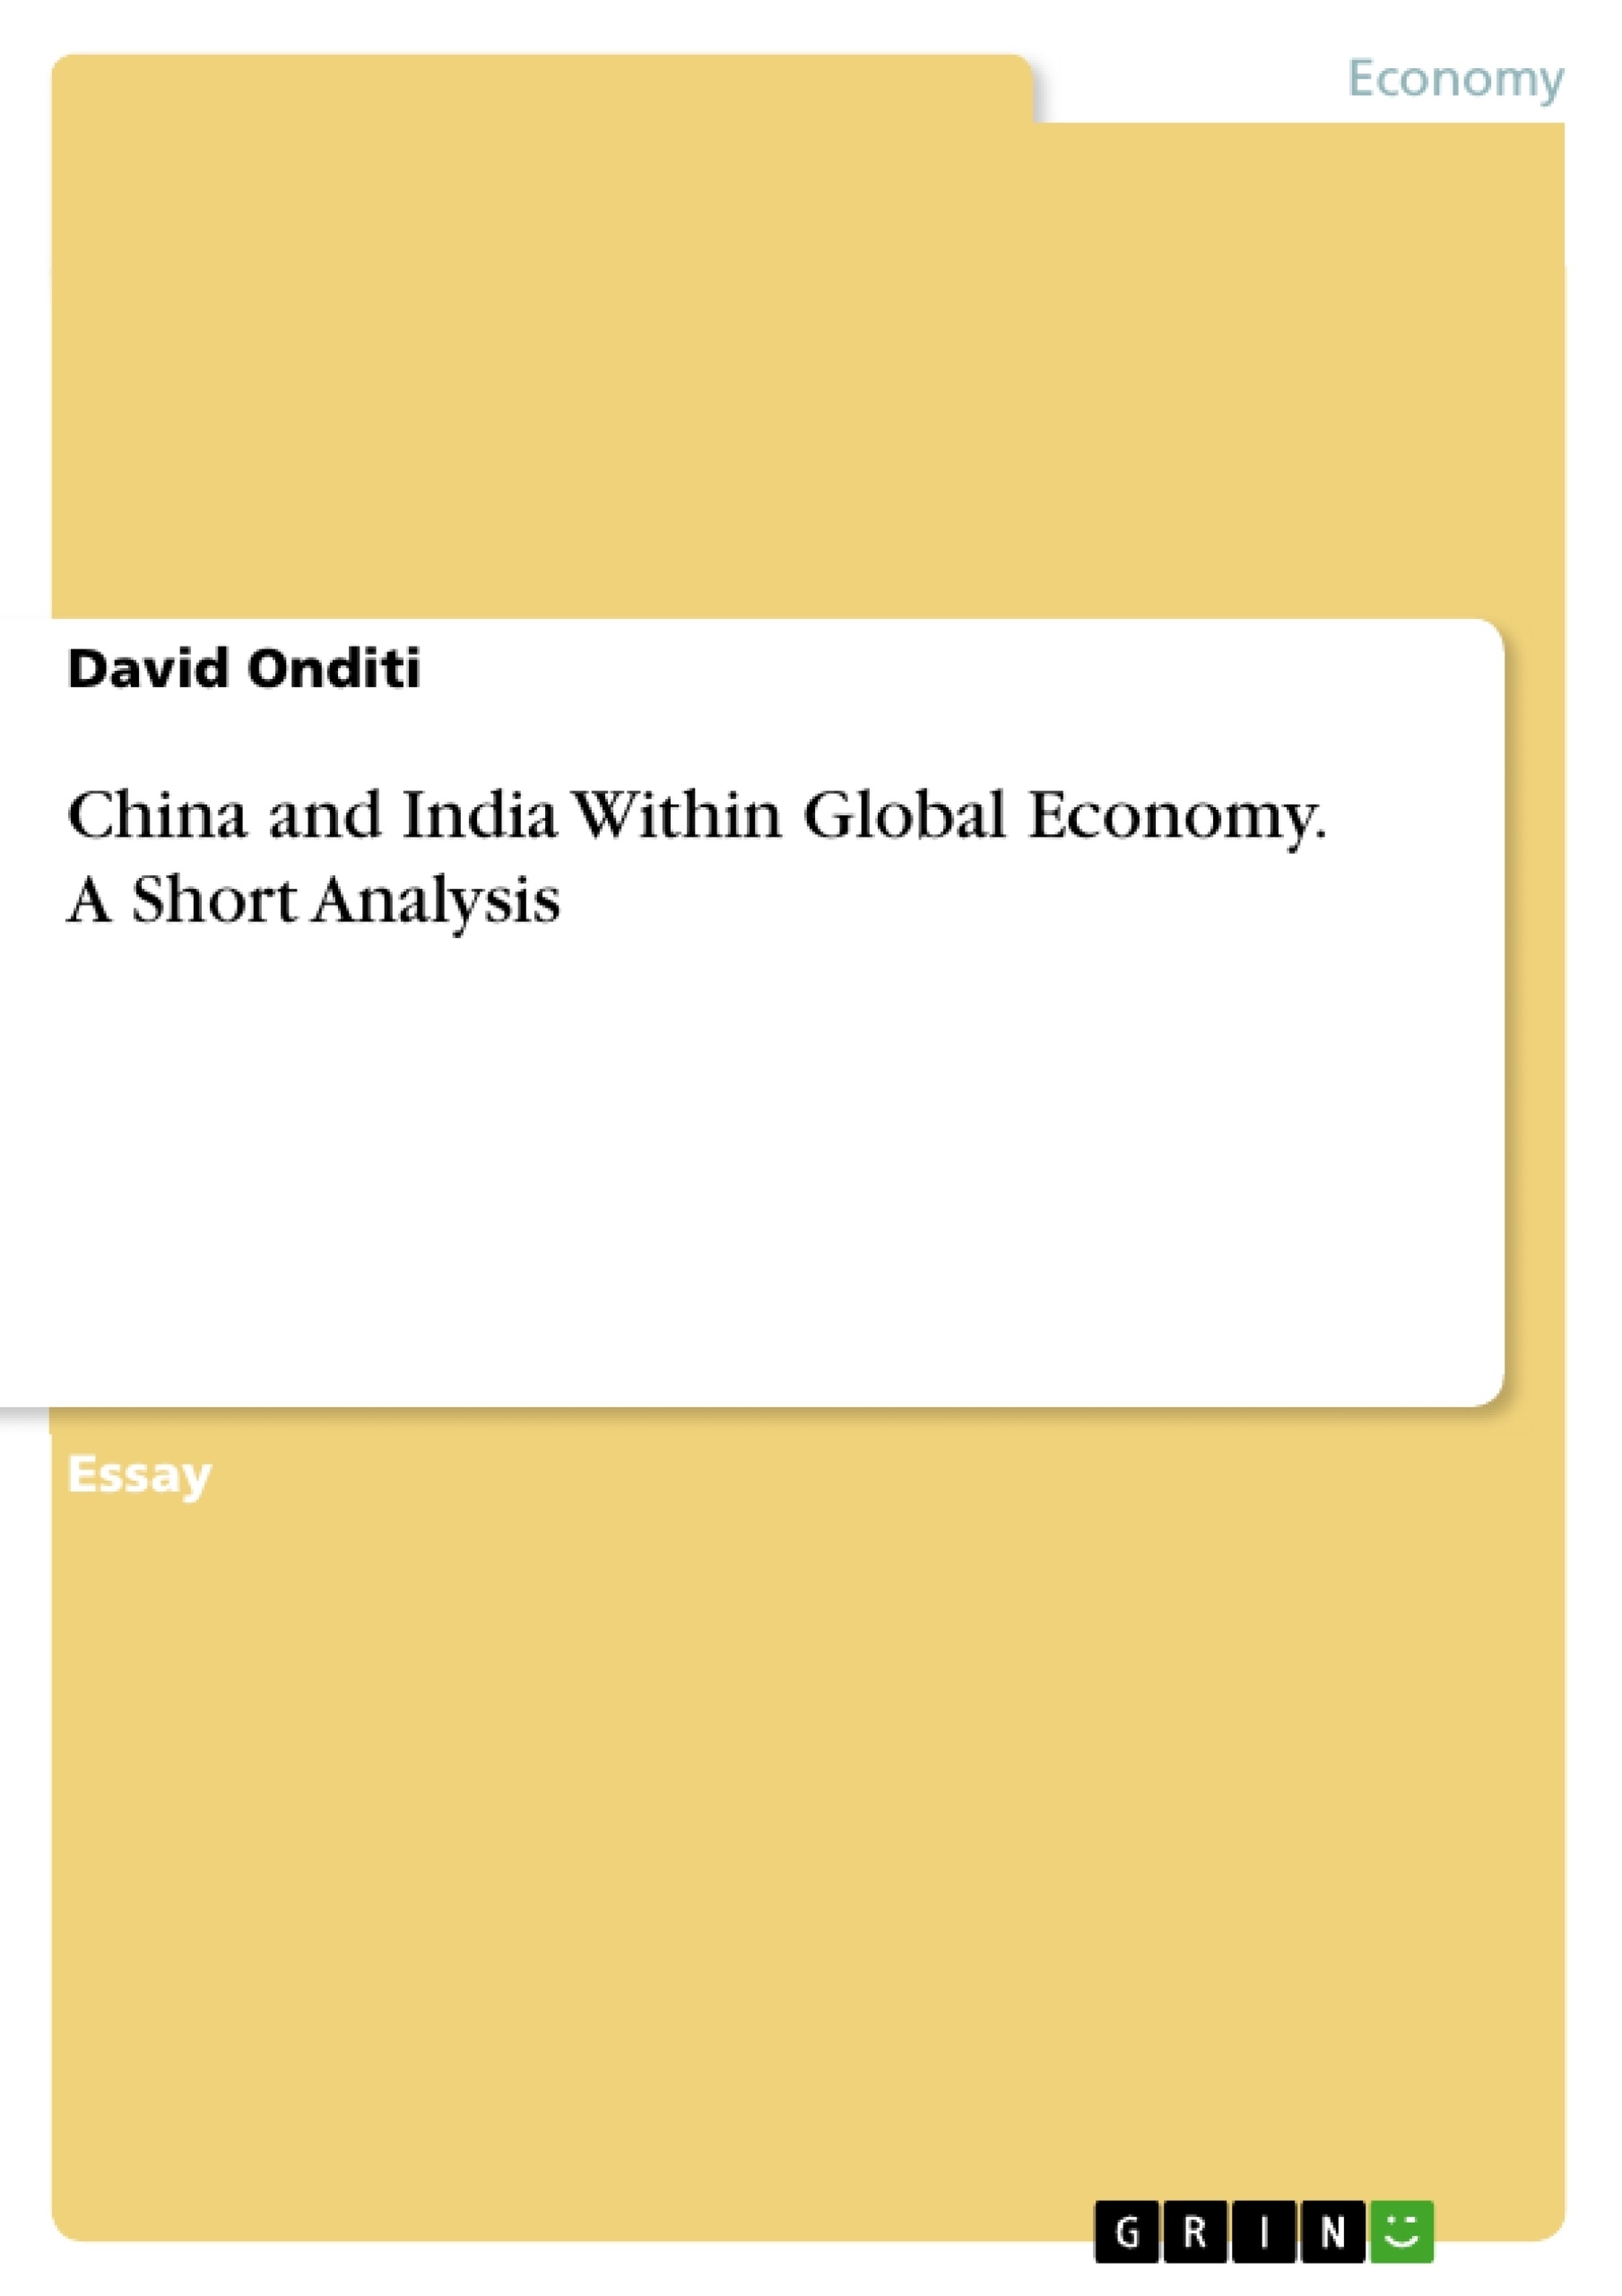 Title: China and India Within Global Economy. A Short Analysis